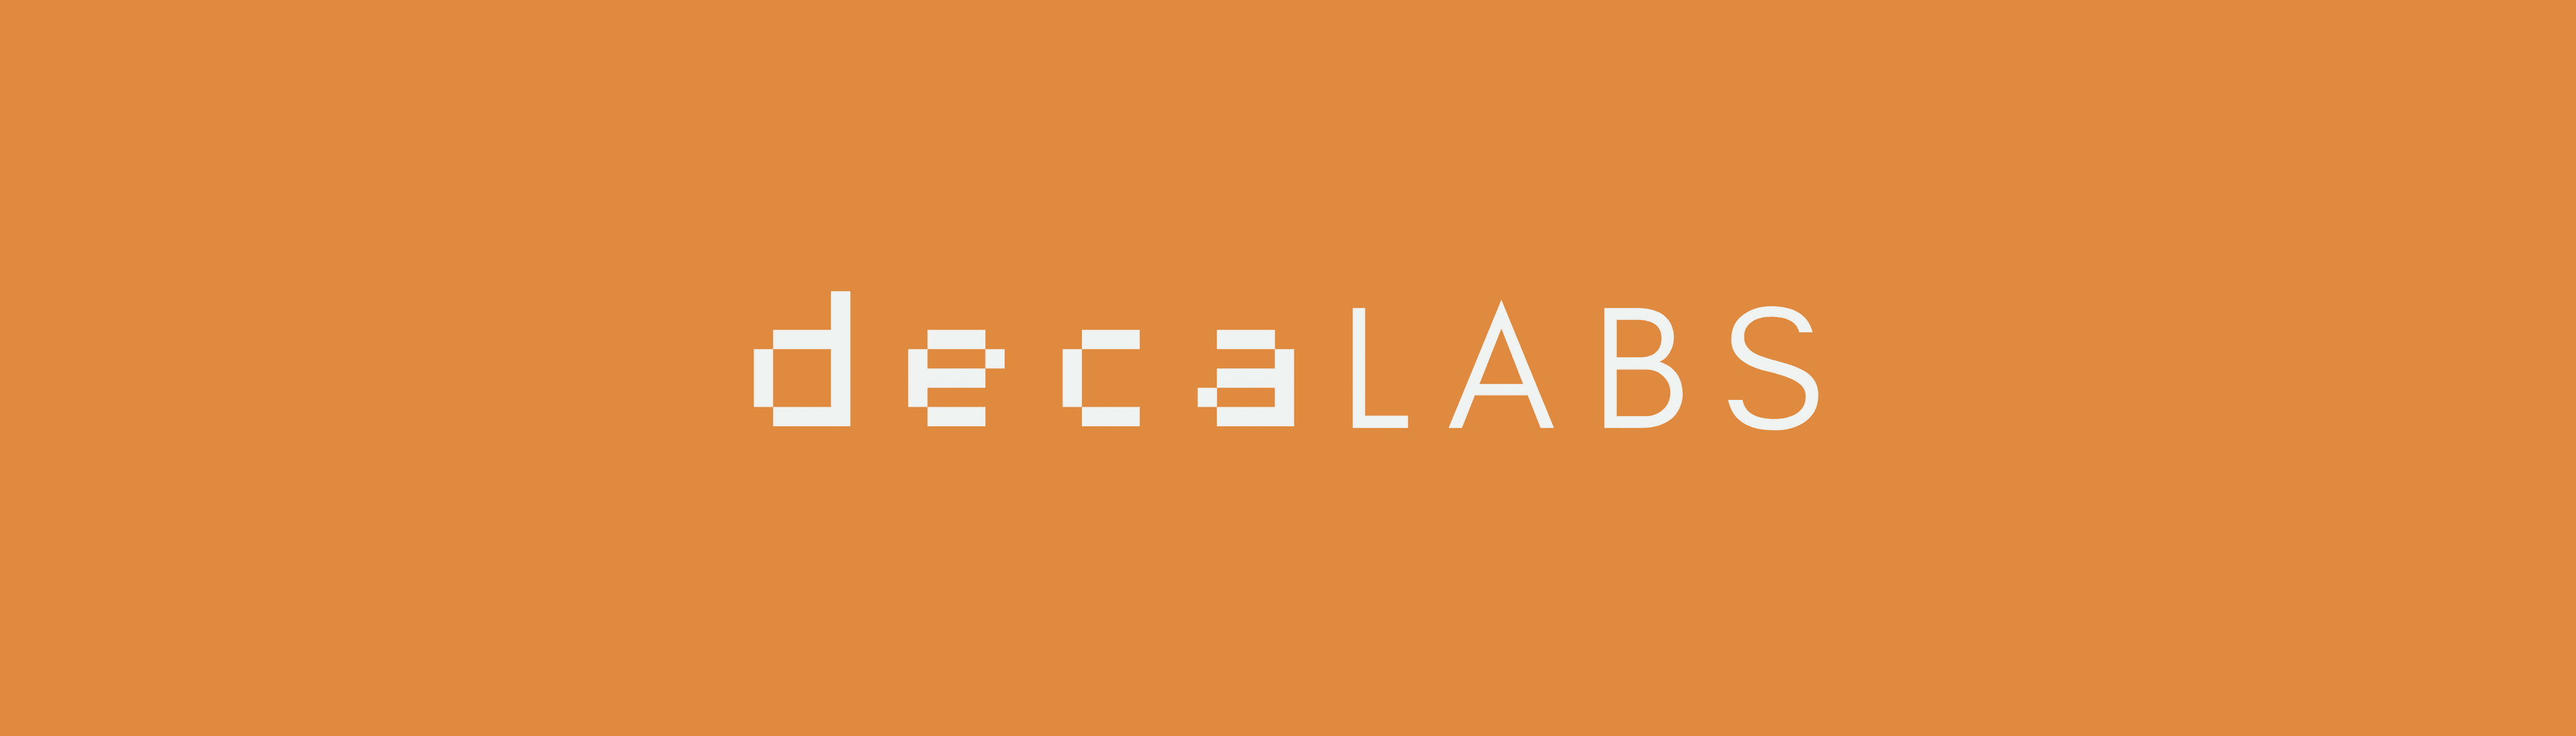 decalabs 배너